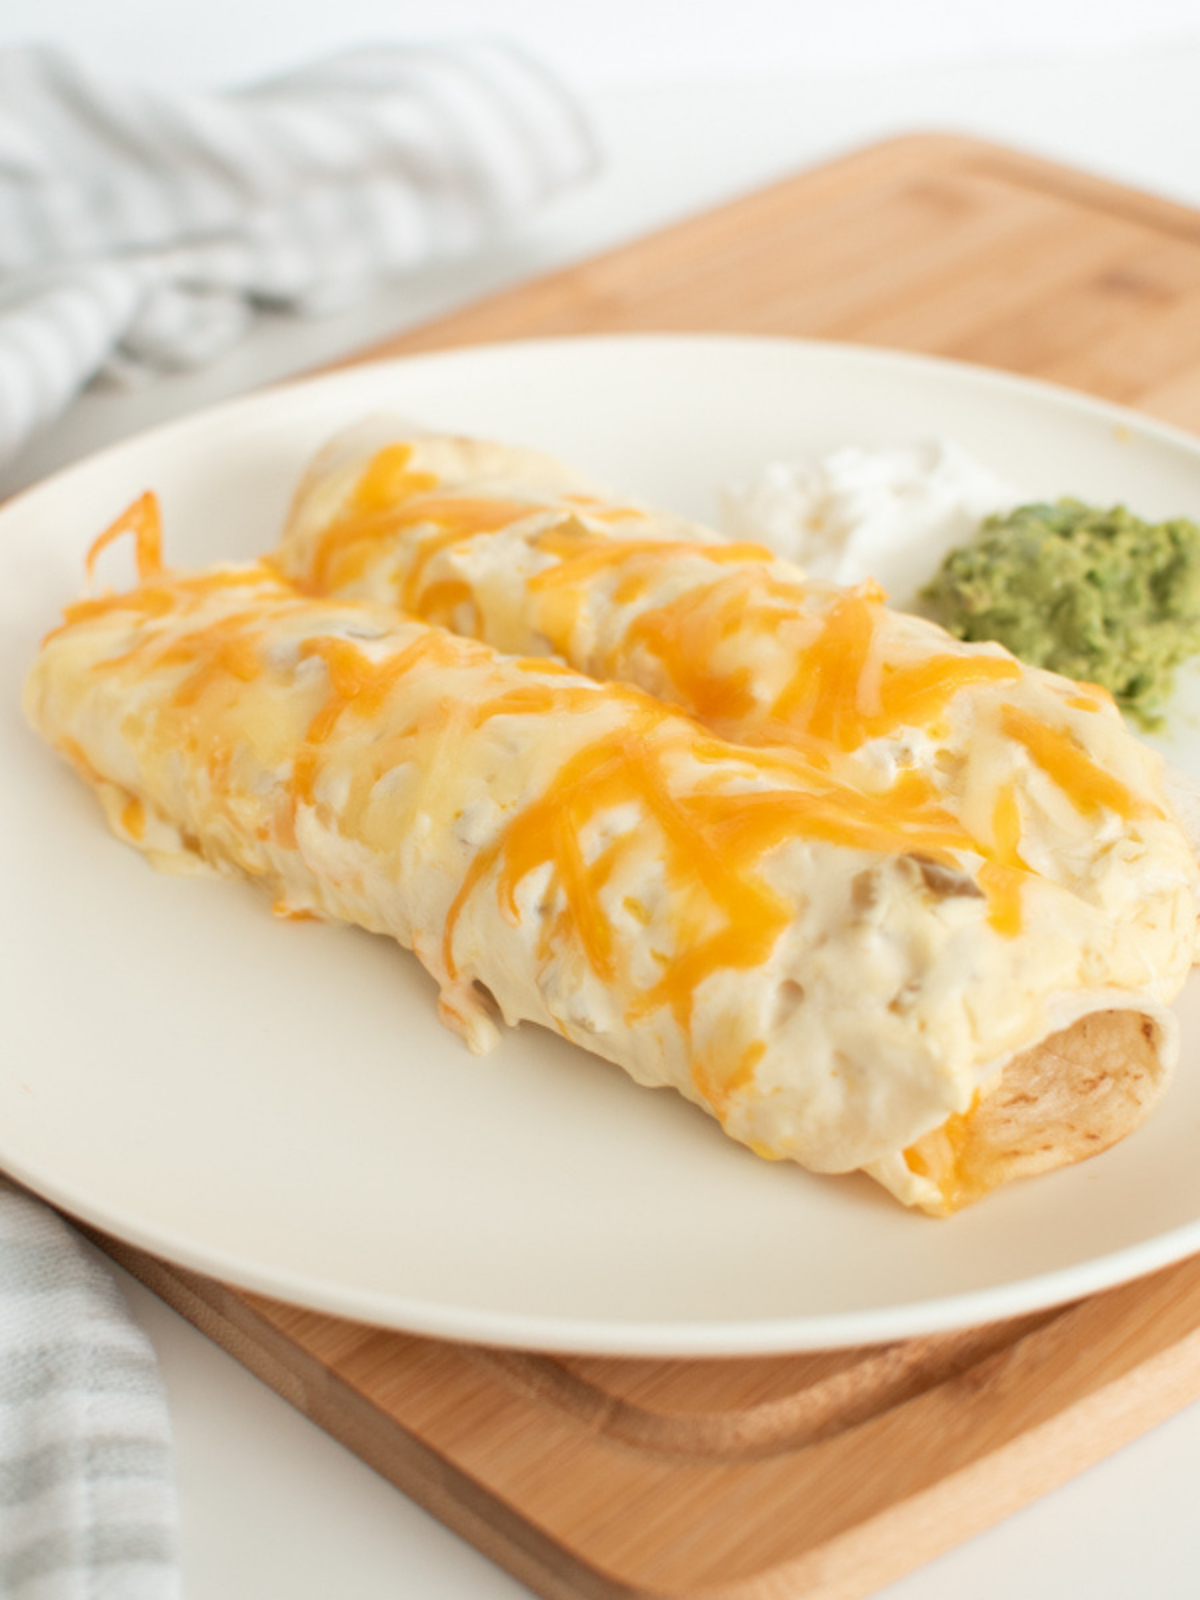 Chicken enchiladas with sour cream white sauce and guacamole on white plate.